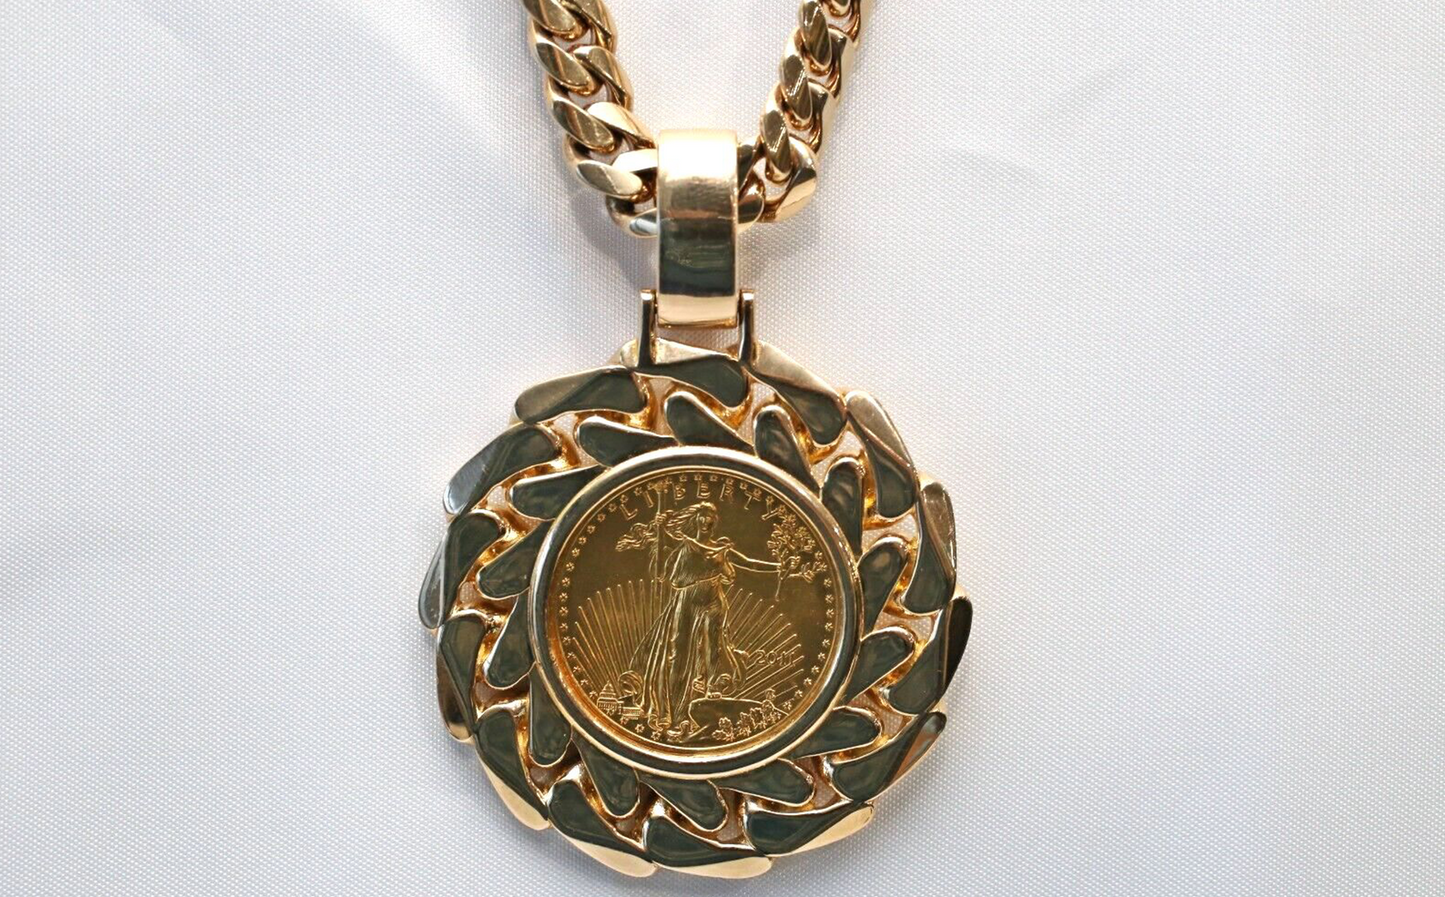 Heavy 14k Yellow Gold Chain & 22k Gold Coin Pendant, 36 inches - 415.5g